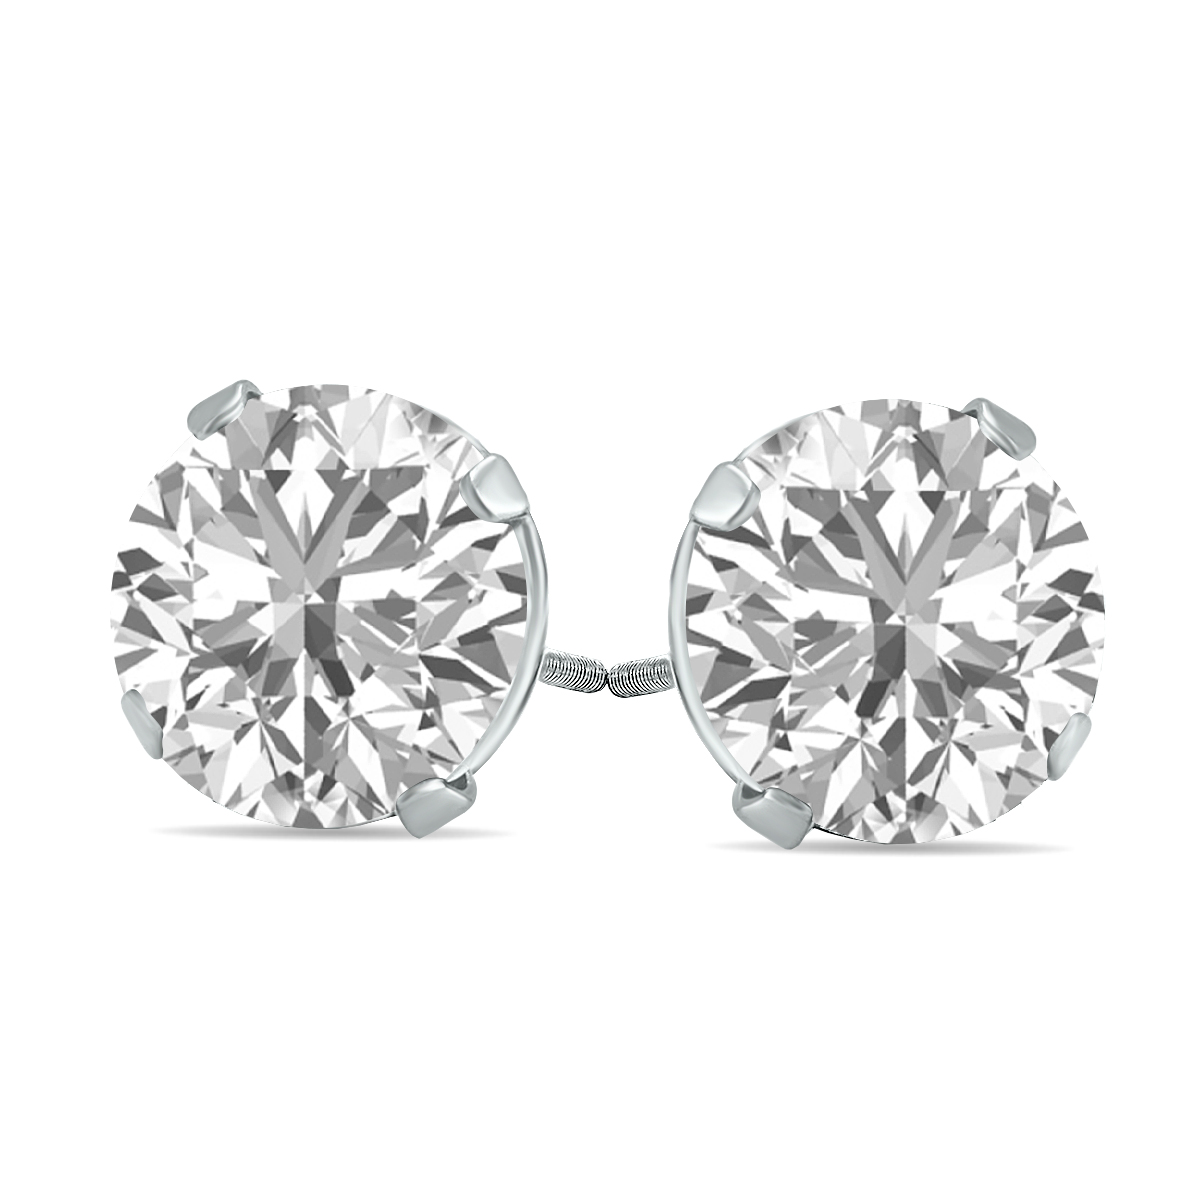 Image of IGI Certified Lab Grown 2 Carat Total Weight Diamond Solitaire Earrings in 14K White Gold (I Color SI2 Clarity)